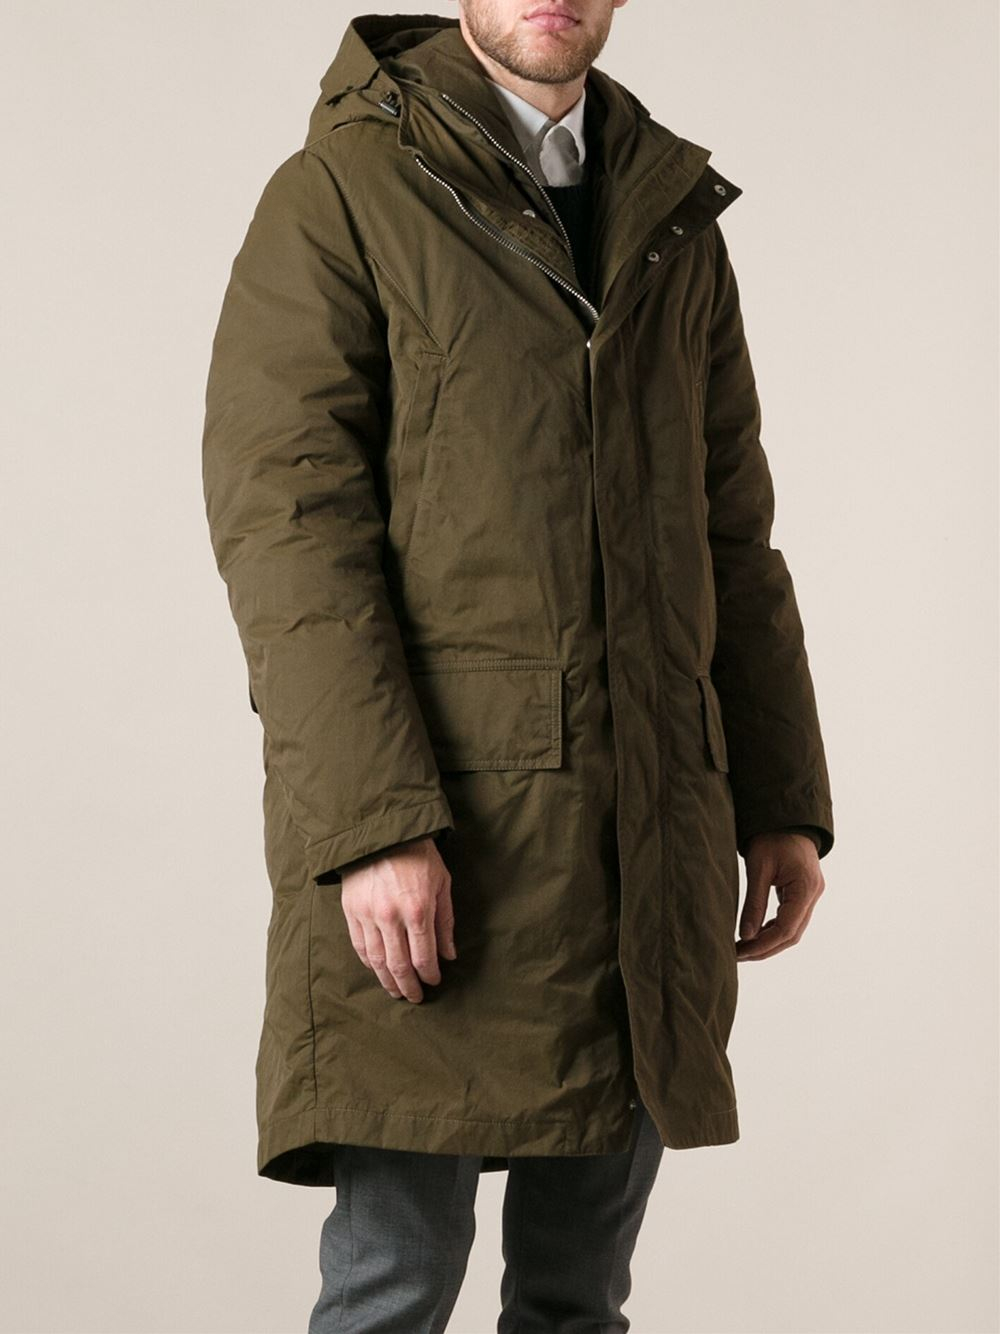 Lyst - Acne Studios 'Montreal' Parka in Green for Men